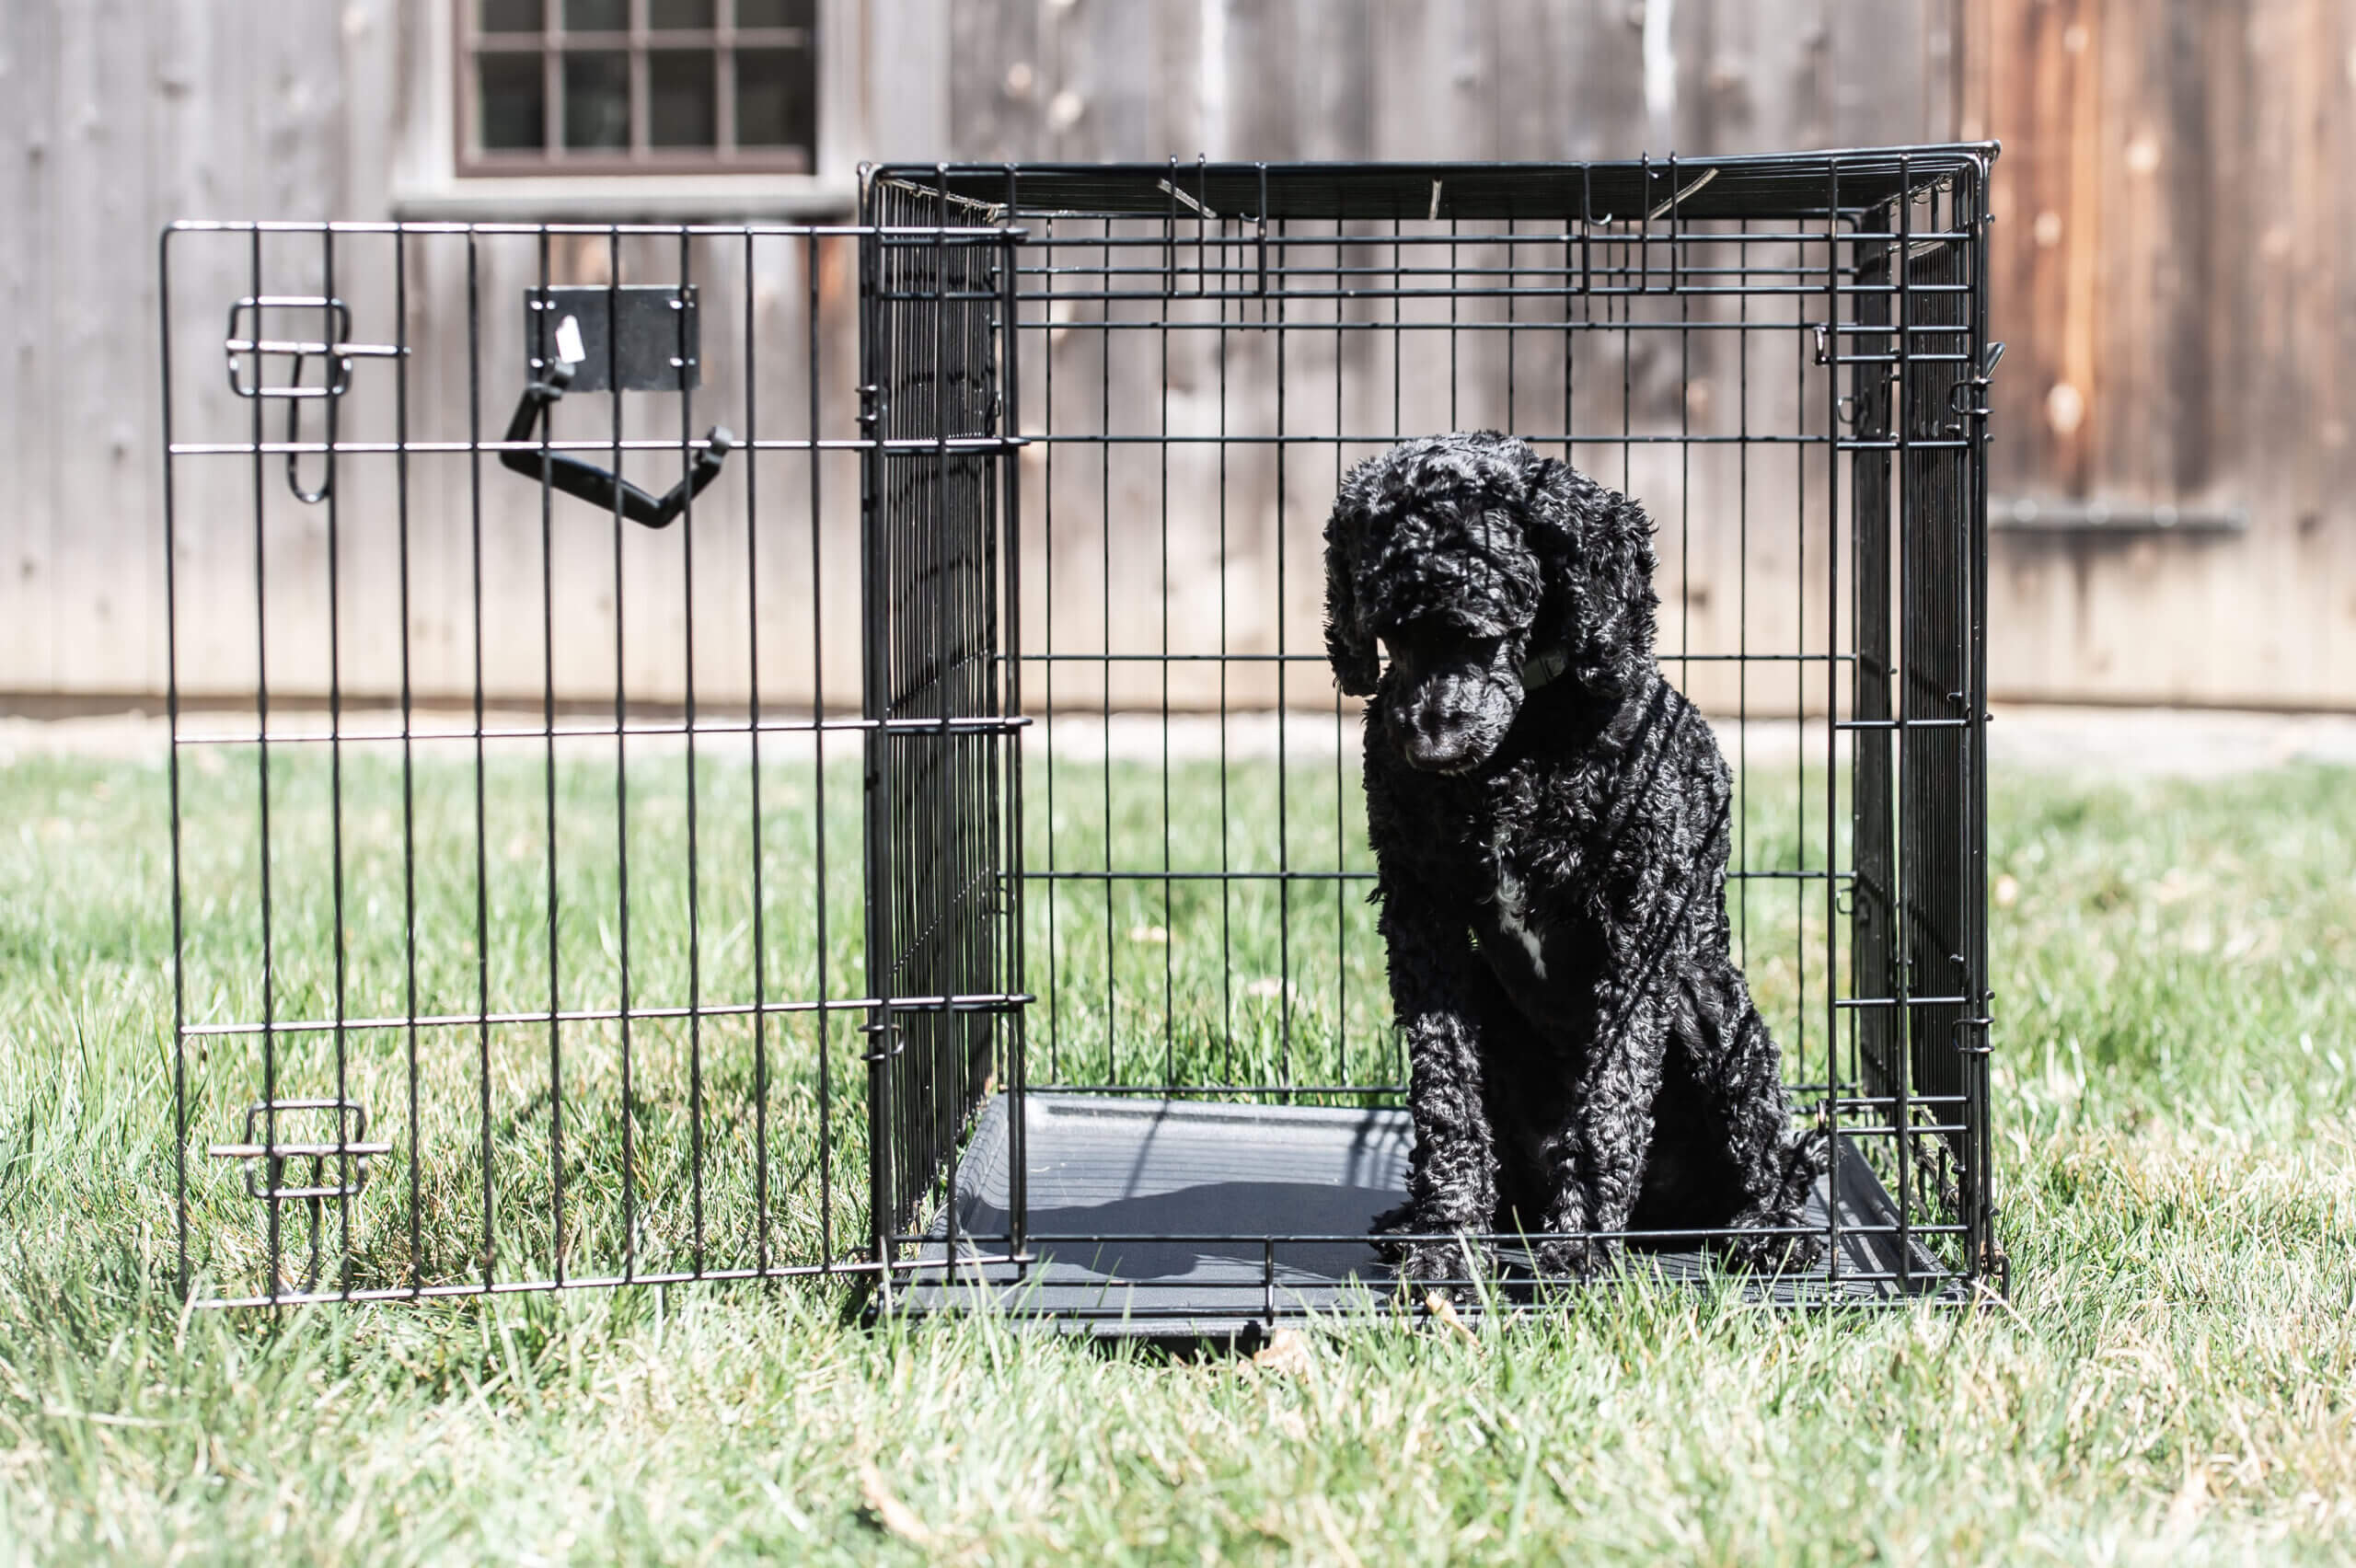 Color image of a black cockapoo sitting in an open cage outside, looking at the edge like it wants to walk out of the cage.